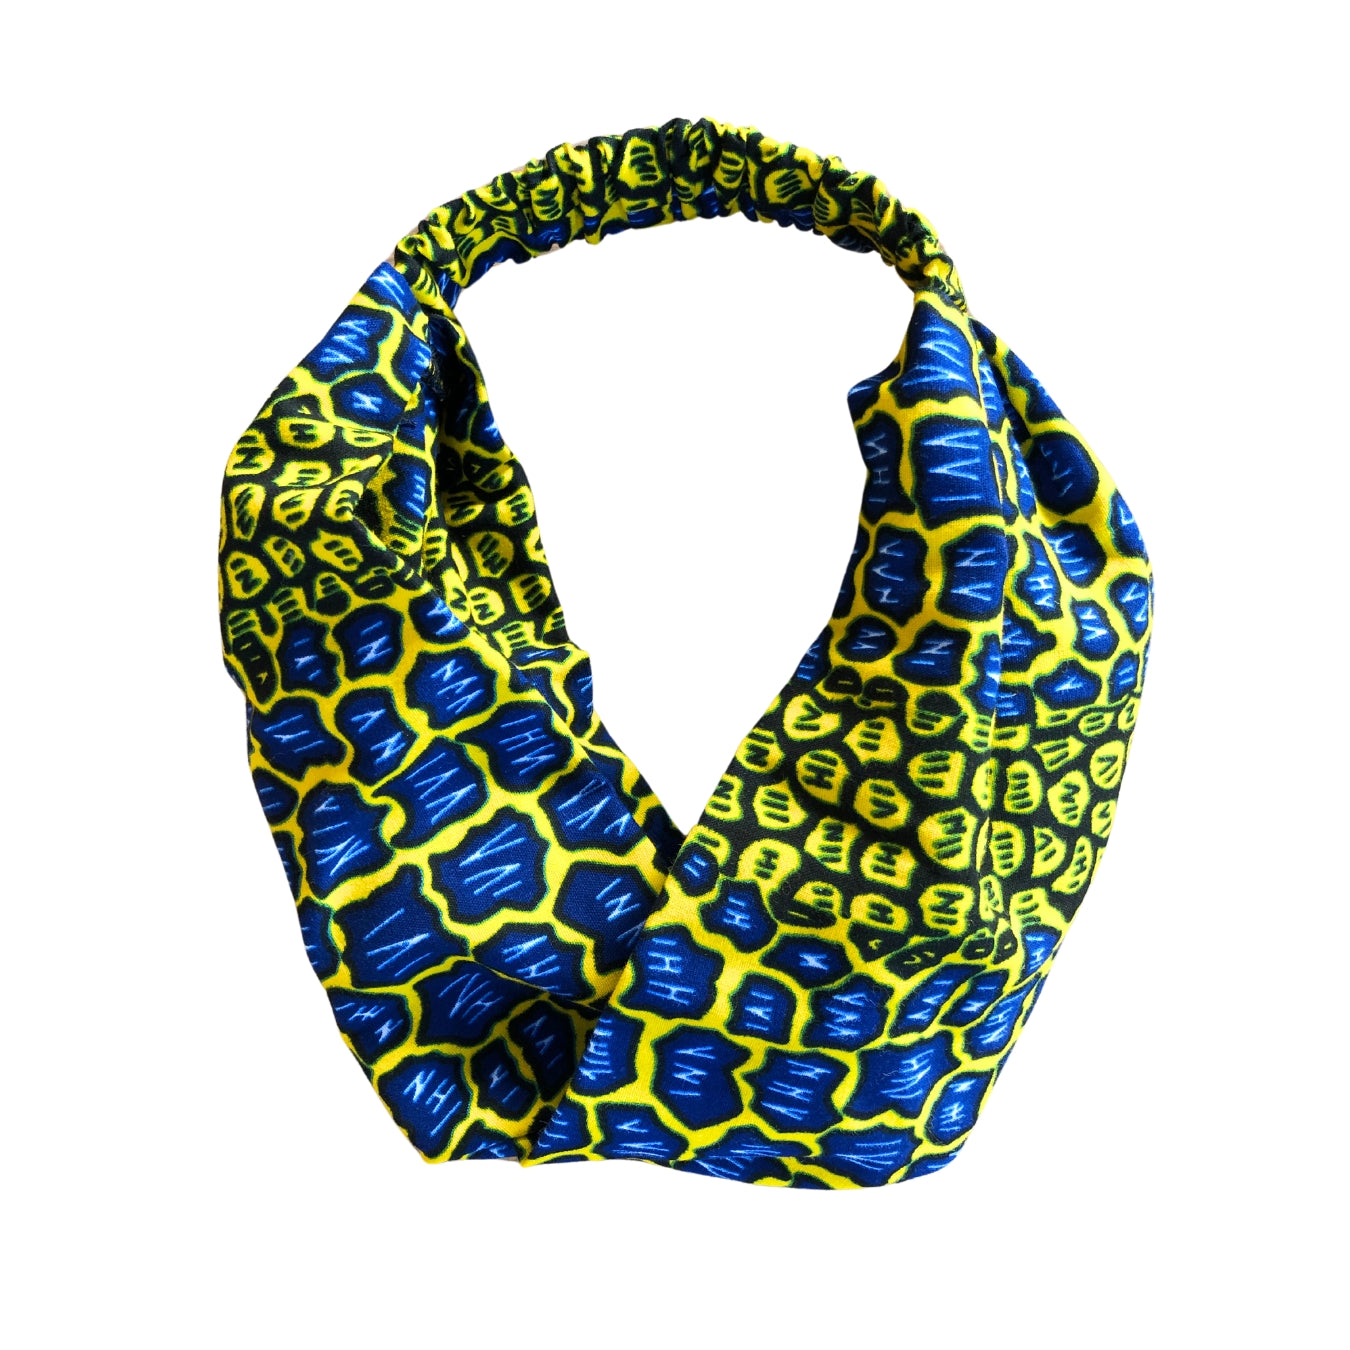 A yellow fabric headband with blue elements on a white plain background.